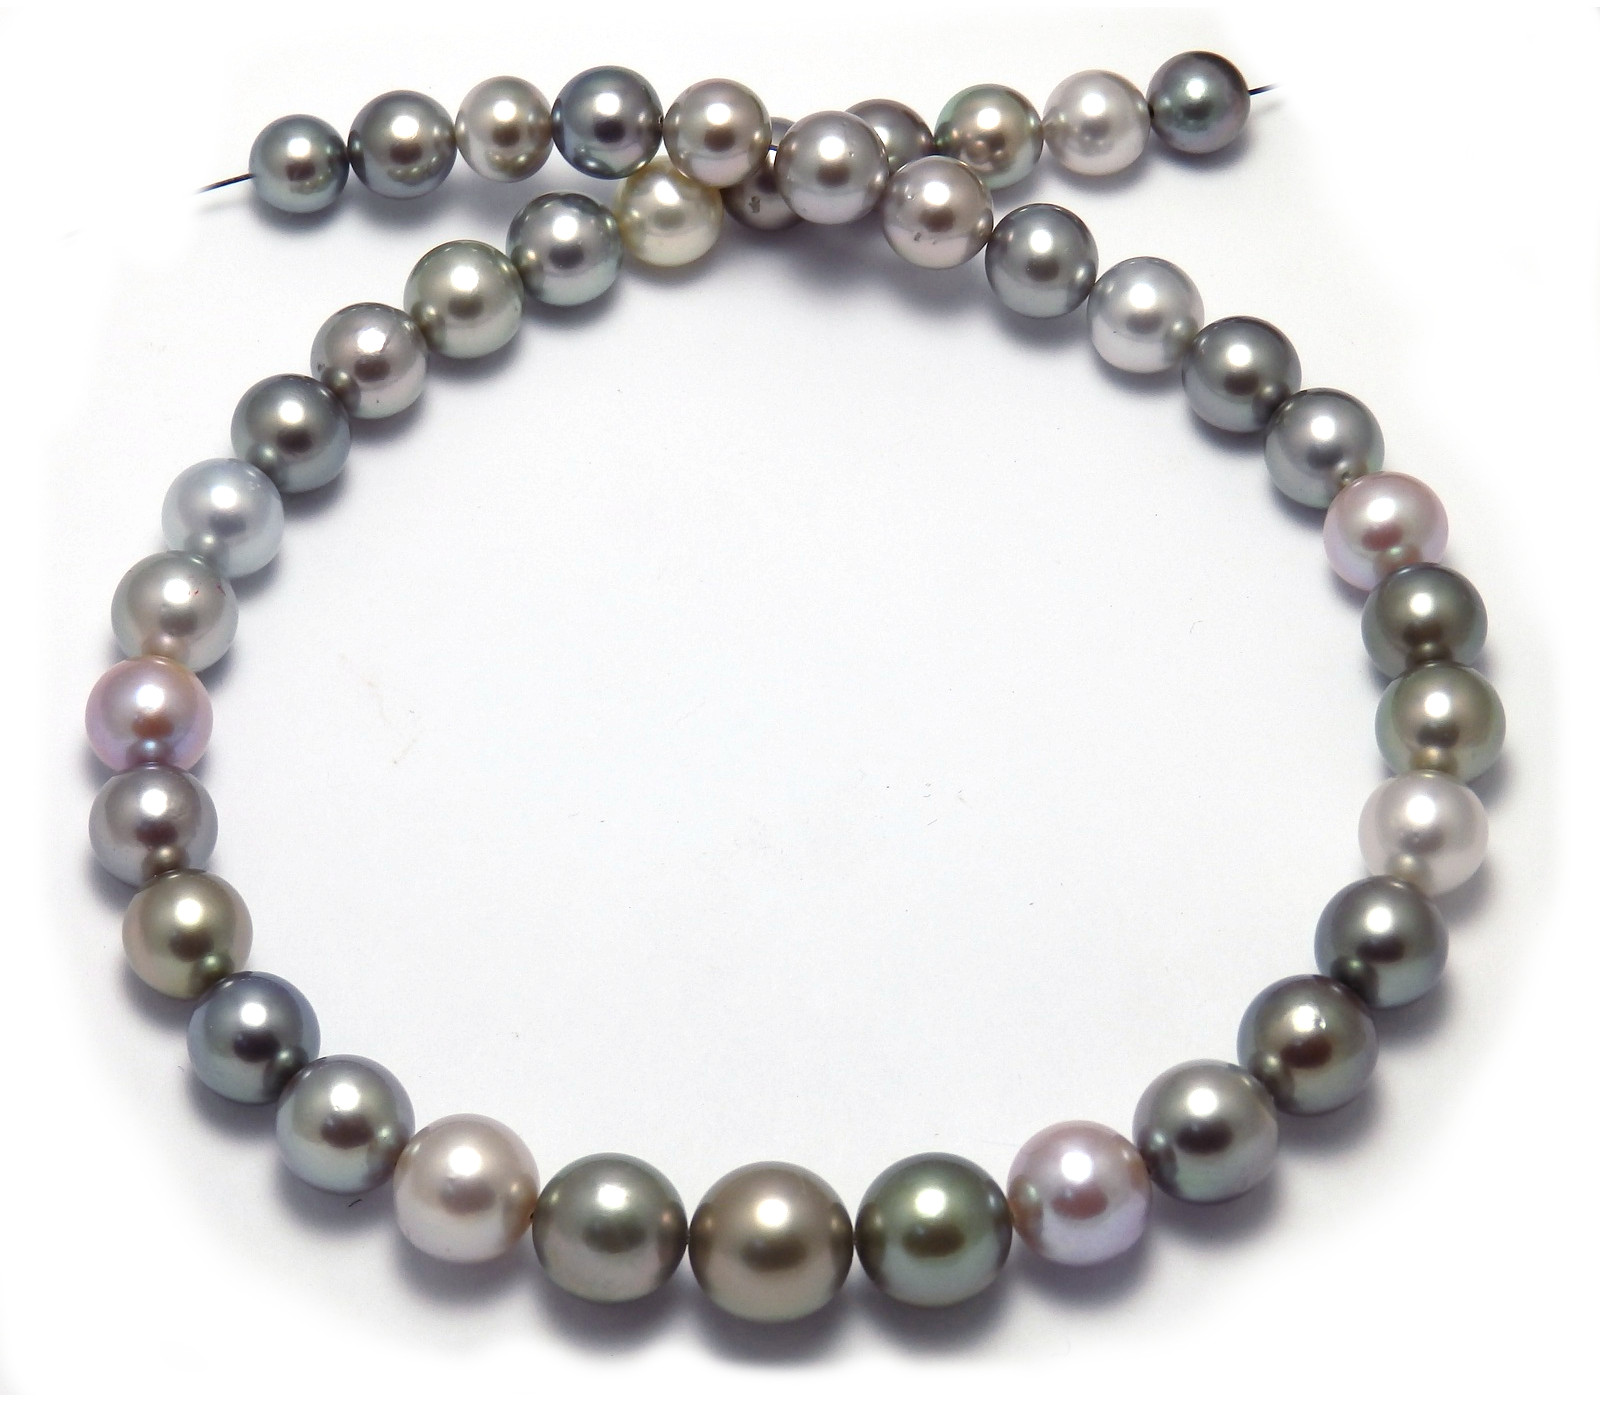 Pastel Freshwater and Tahitian Pearl Necklace with Round Tahitian Pearls